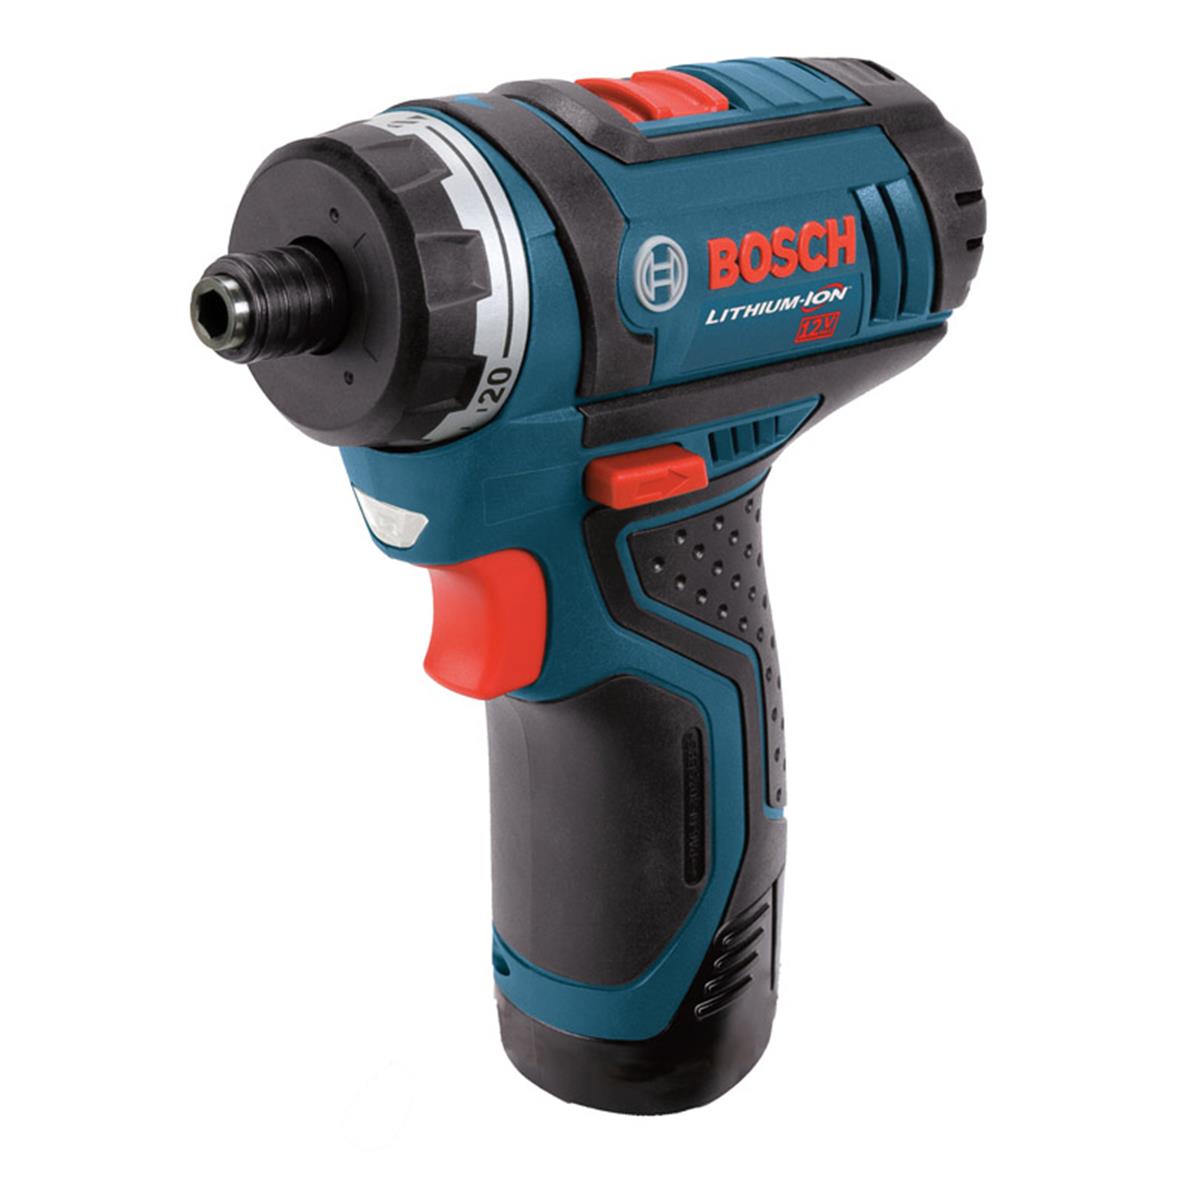 2493096 12v 0.25 In. 2 Speed Cordless Compact Drill & Driver Kit, Blue - 1300 Rpm